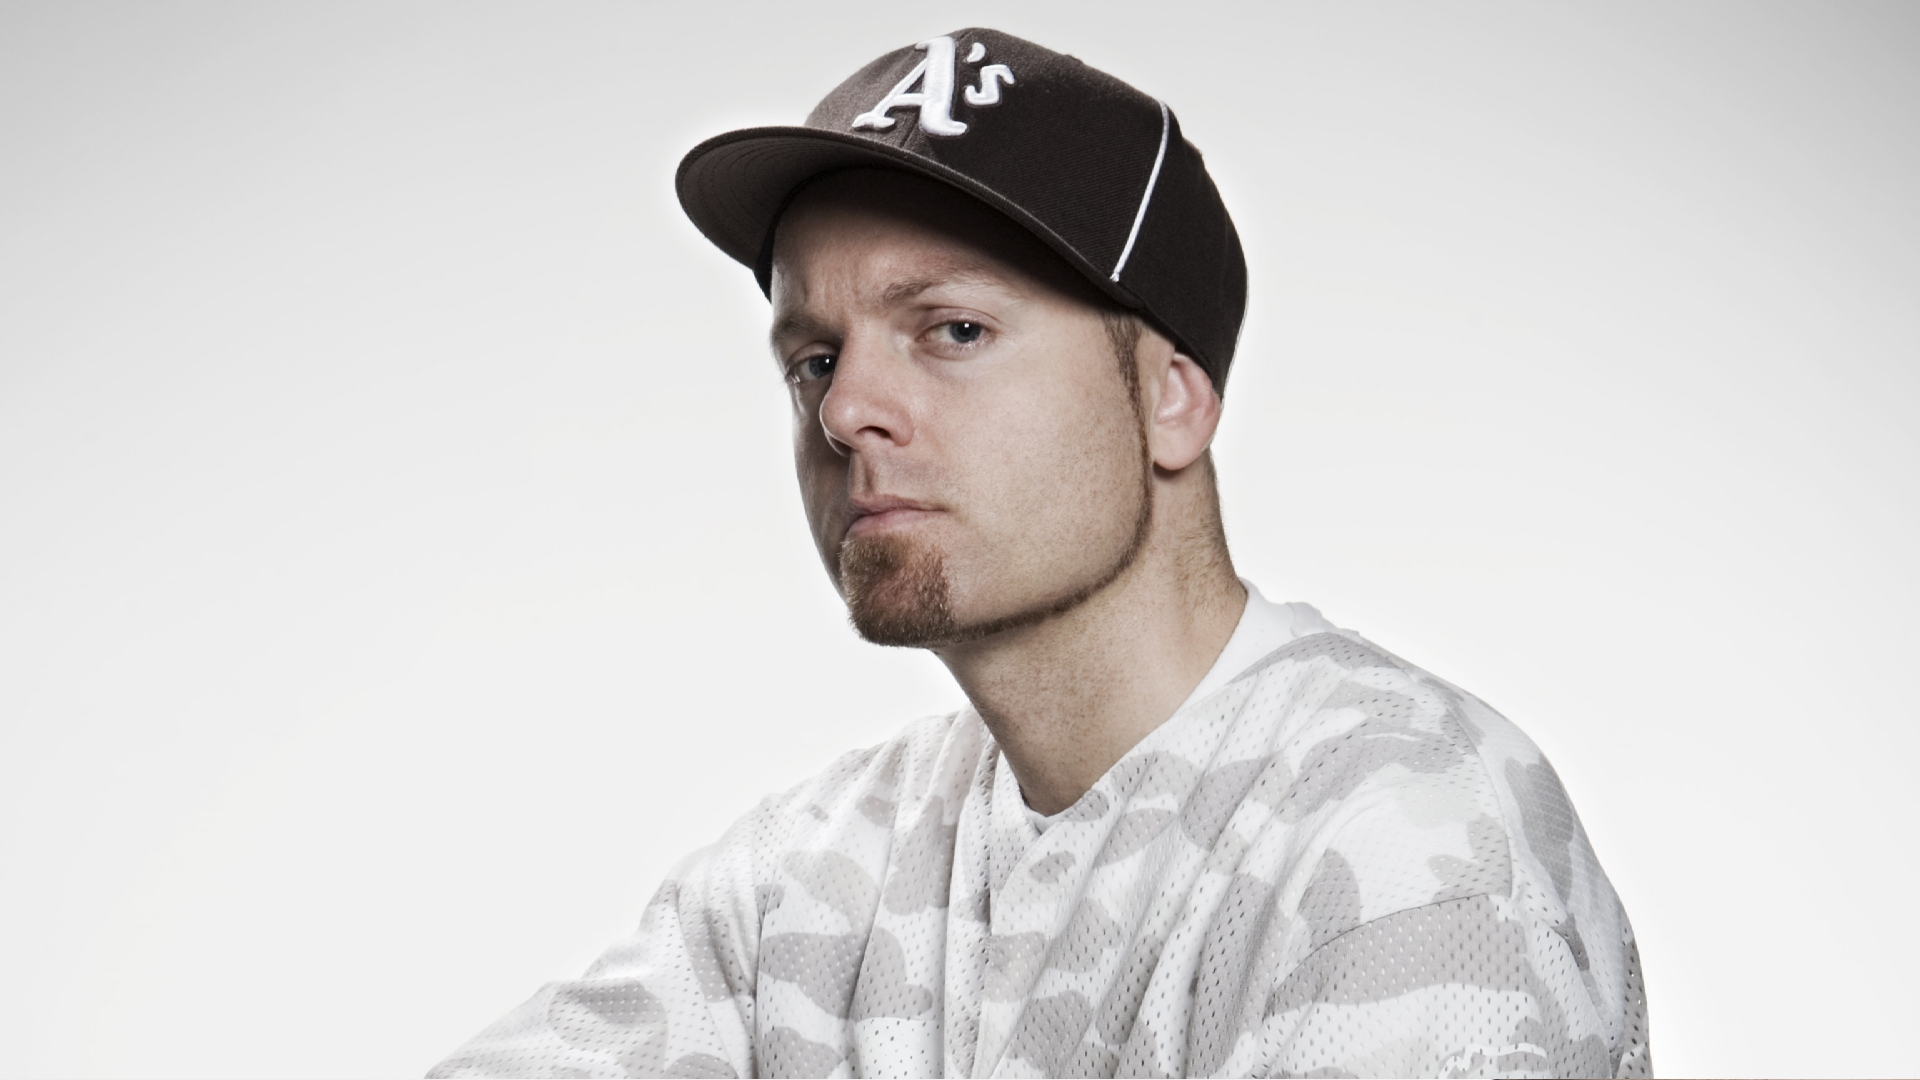 1 Dj Shadow HD Wallpapers Backgrounds - Wallpaper Abyss